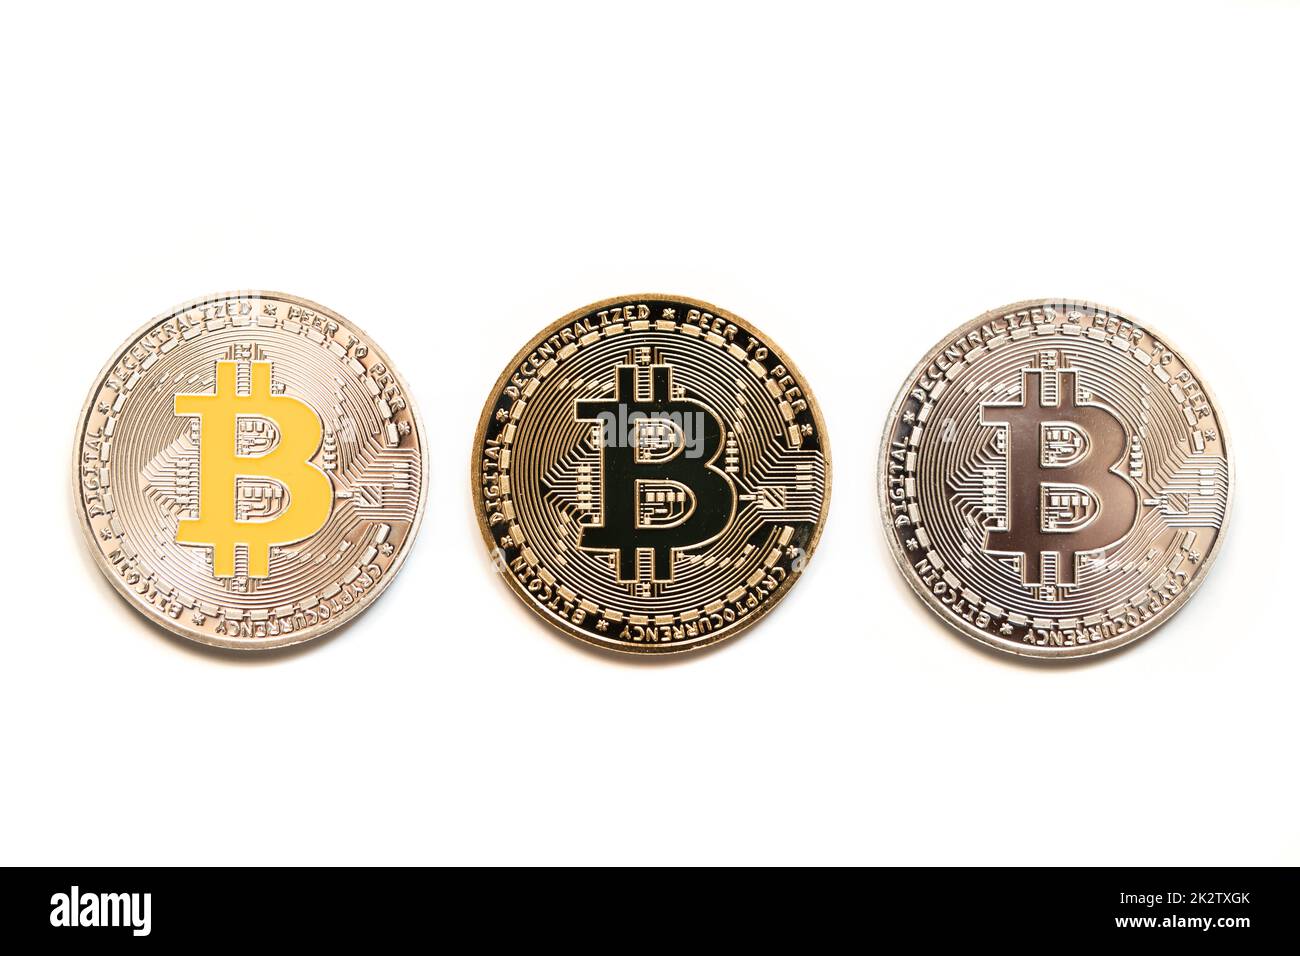 Close up shot of silver and gold bitcoin digital cryptocurrency coins, on white. Stock Photo